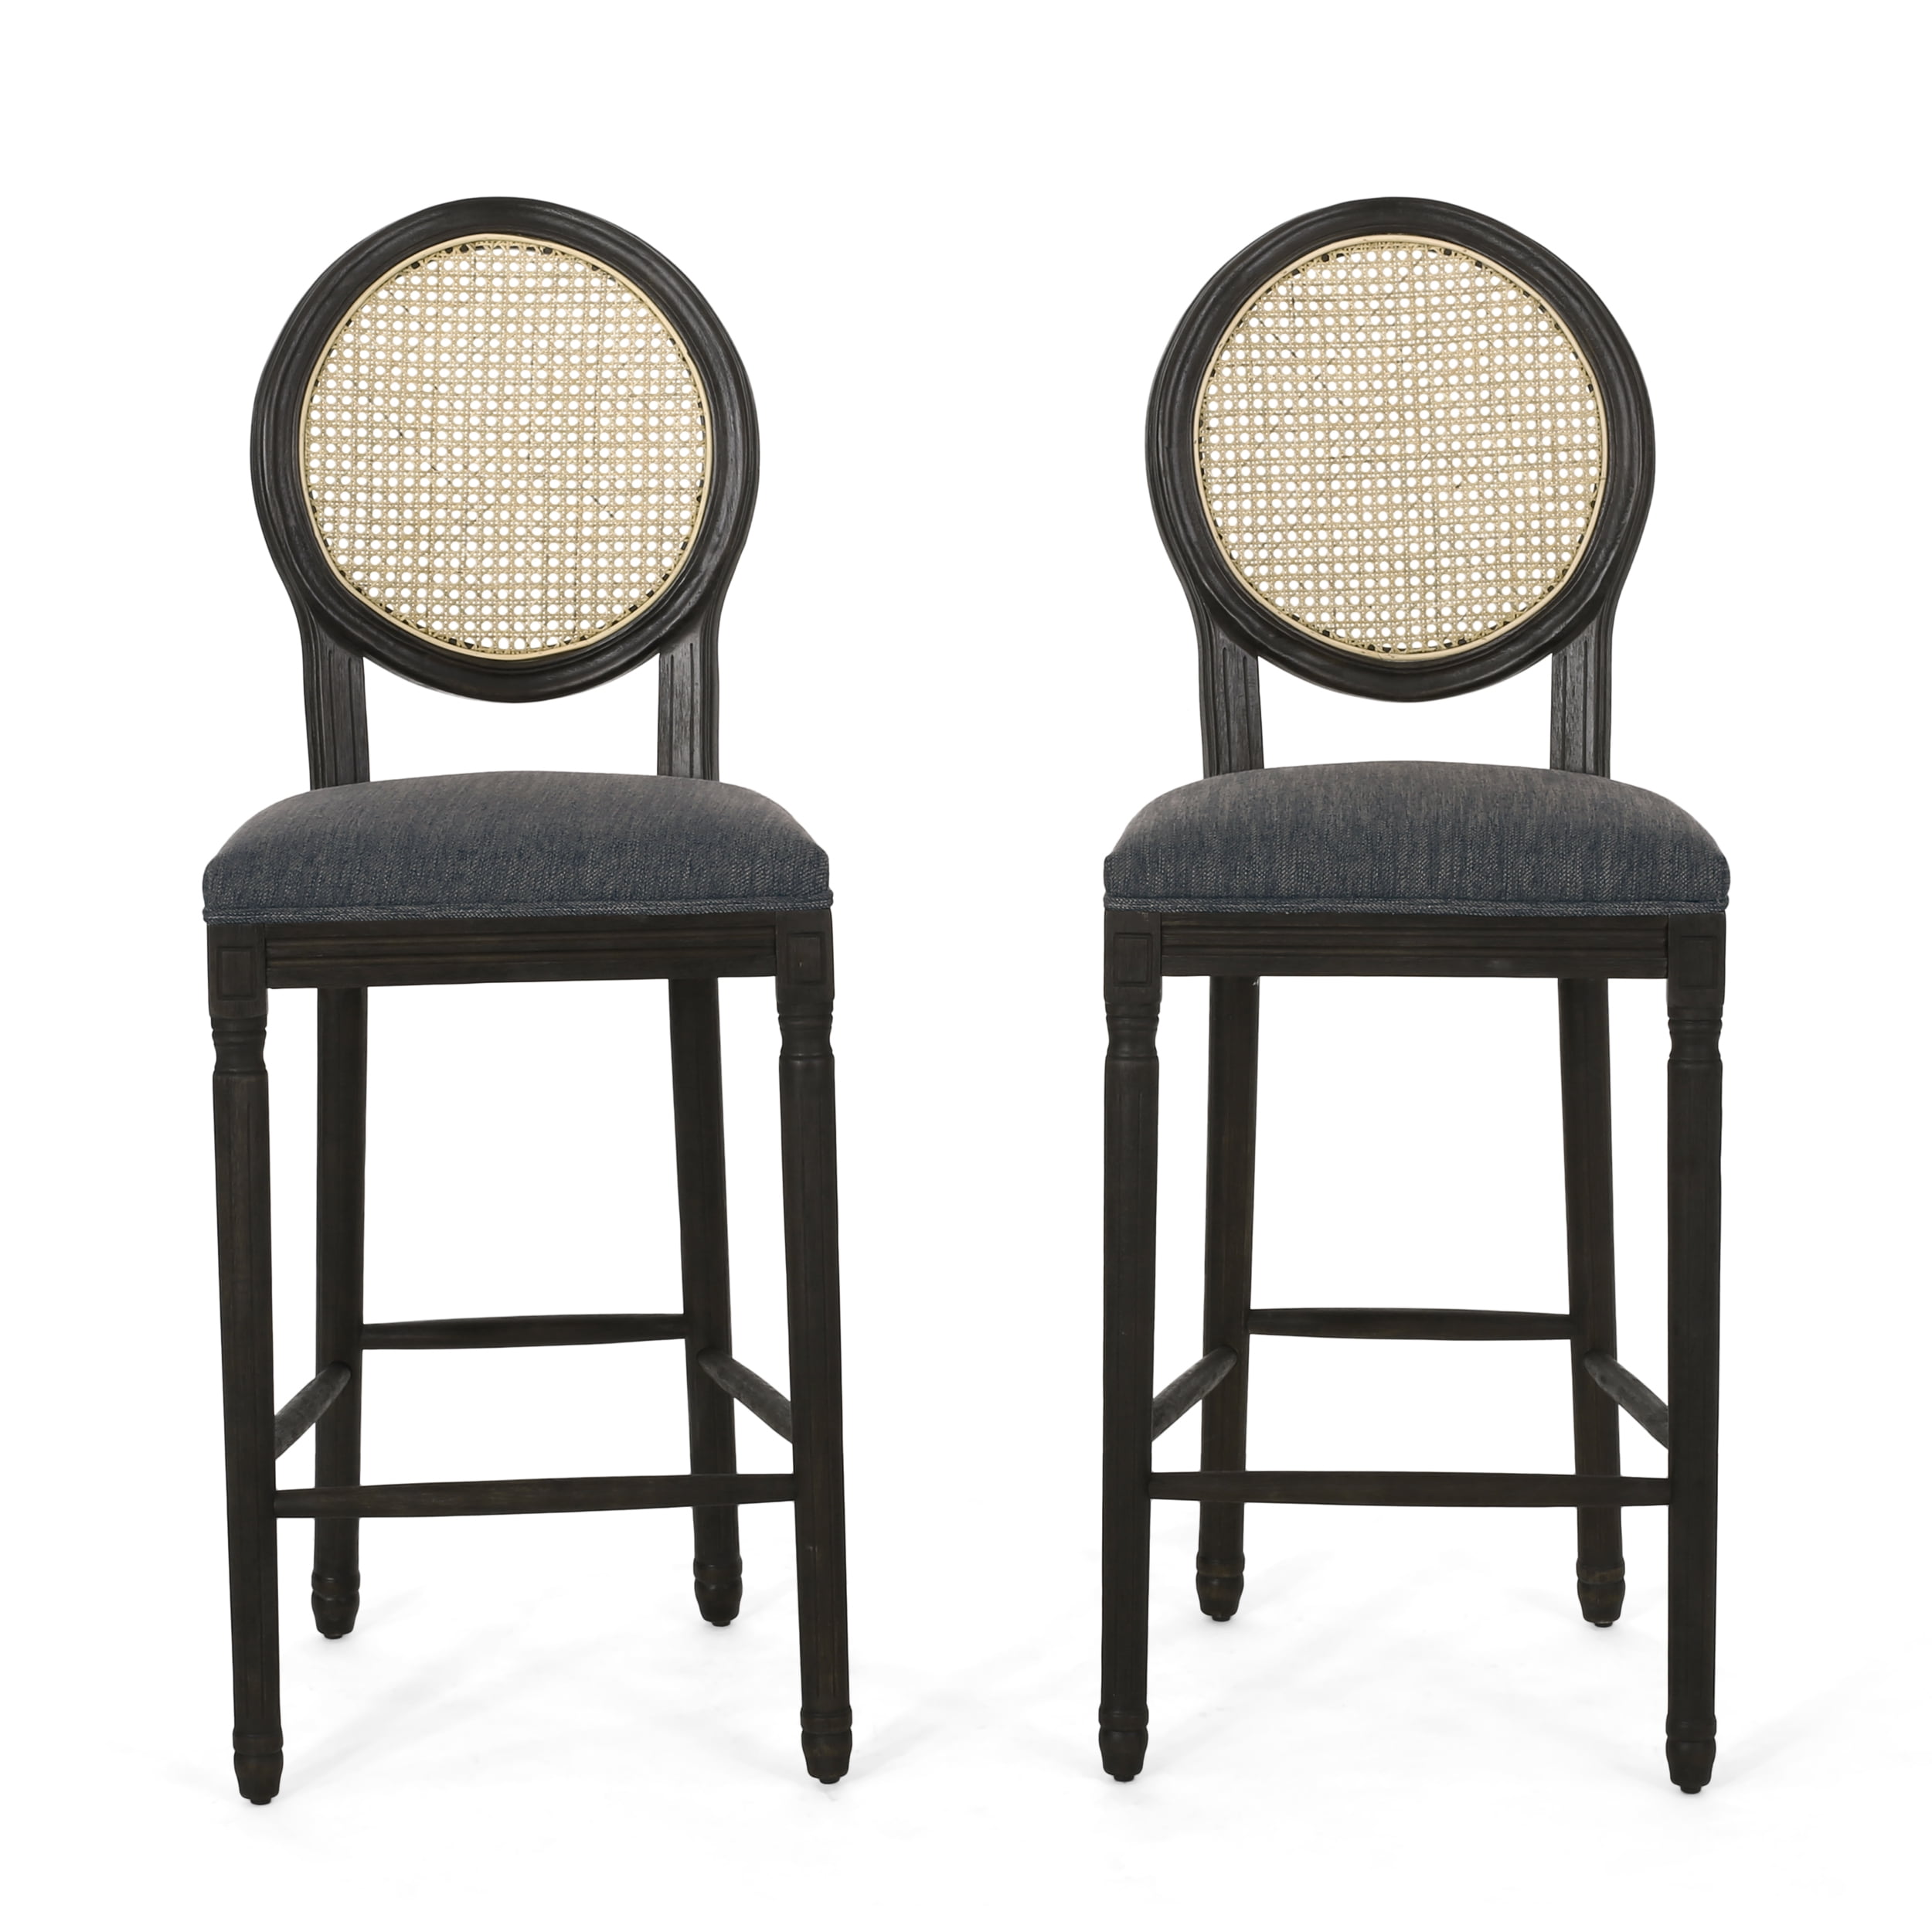 Salton French Country Wooden Barstools, French Inspired Bar Stools